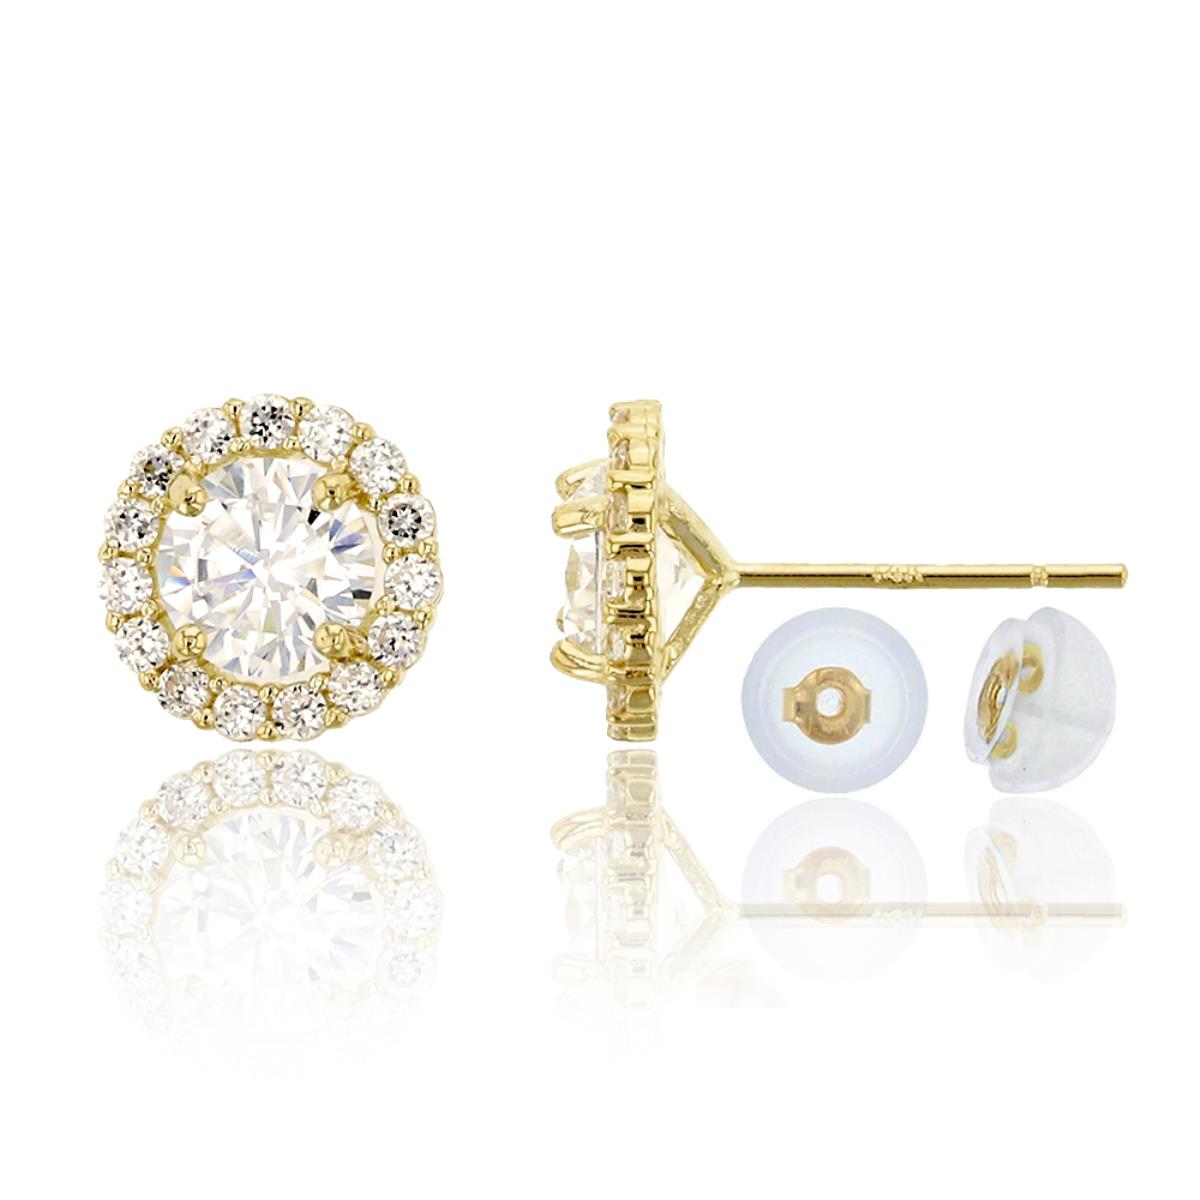 10K Yellow Gold 5mm Round Cut Halo Stud Earring & 10K Silicone Back